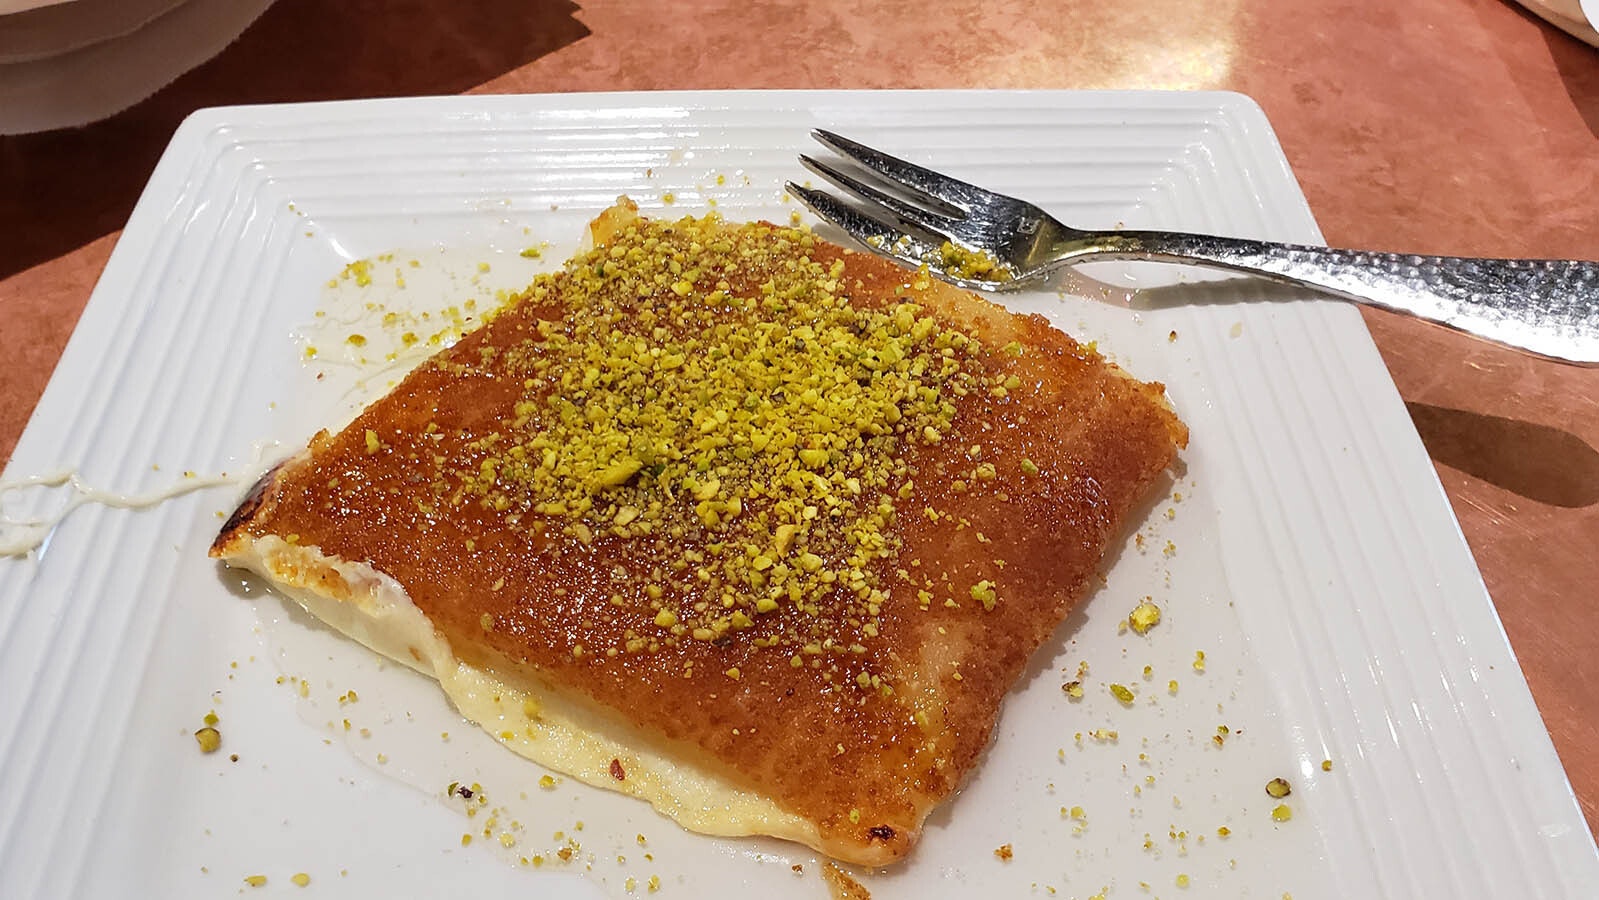 This dish is a Lebanese cheesecake known as knafeh (pronounced kanayafeh). This can be eaten for breakfast, but at figs it's available as a dessert. It's a toasted stringy mozzarella-like cheese topped with rose syrup and nuts.